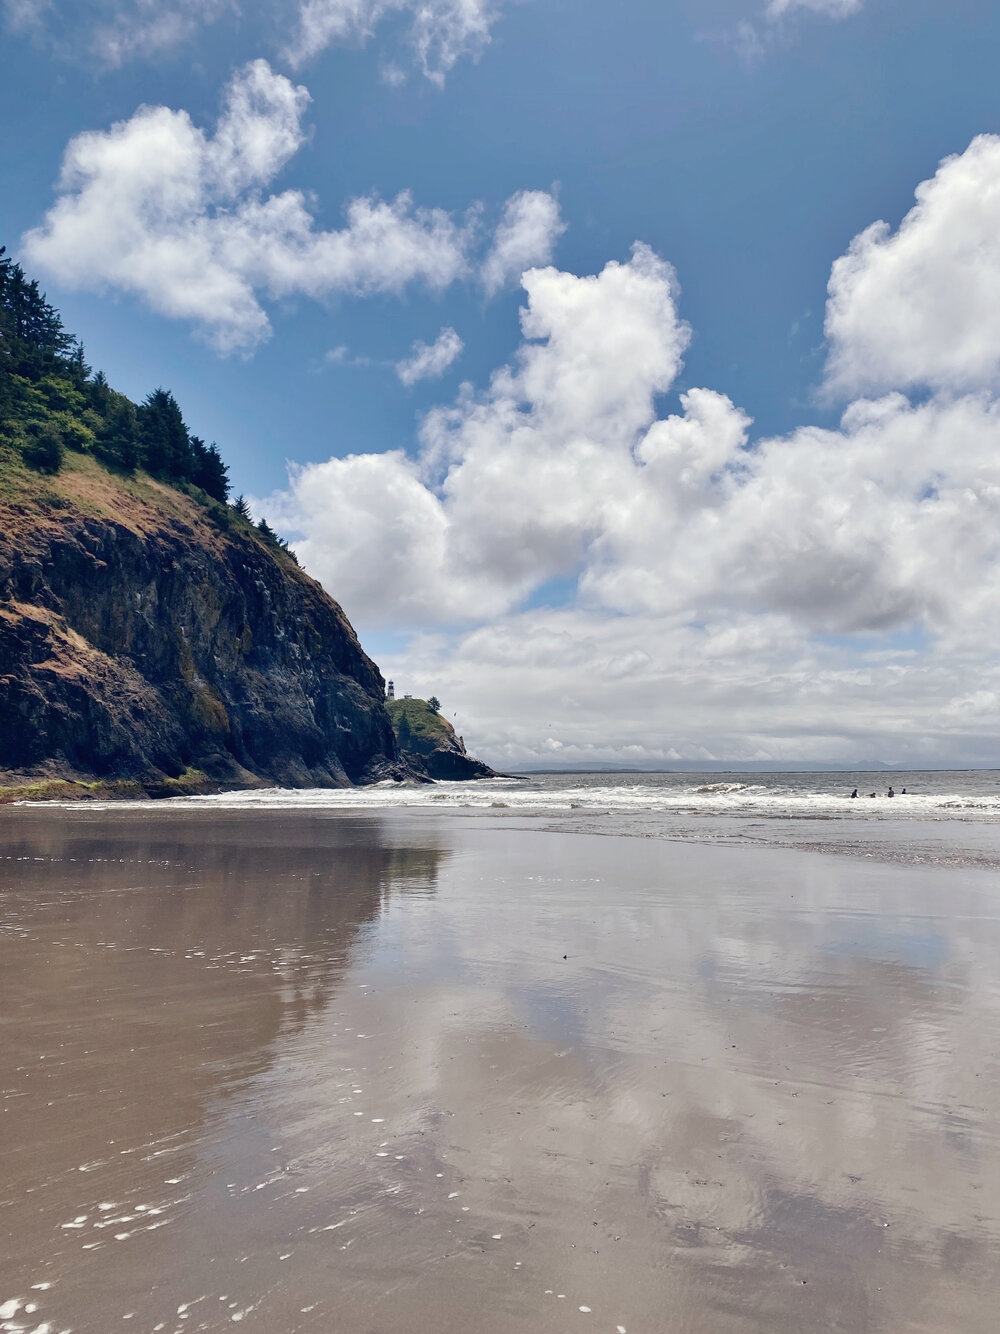 Waikiki Beach at Cape Disappointment State Park Full Review